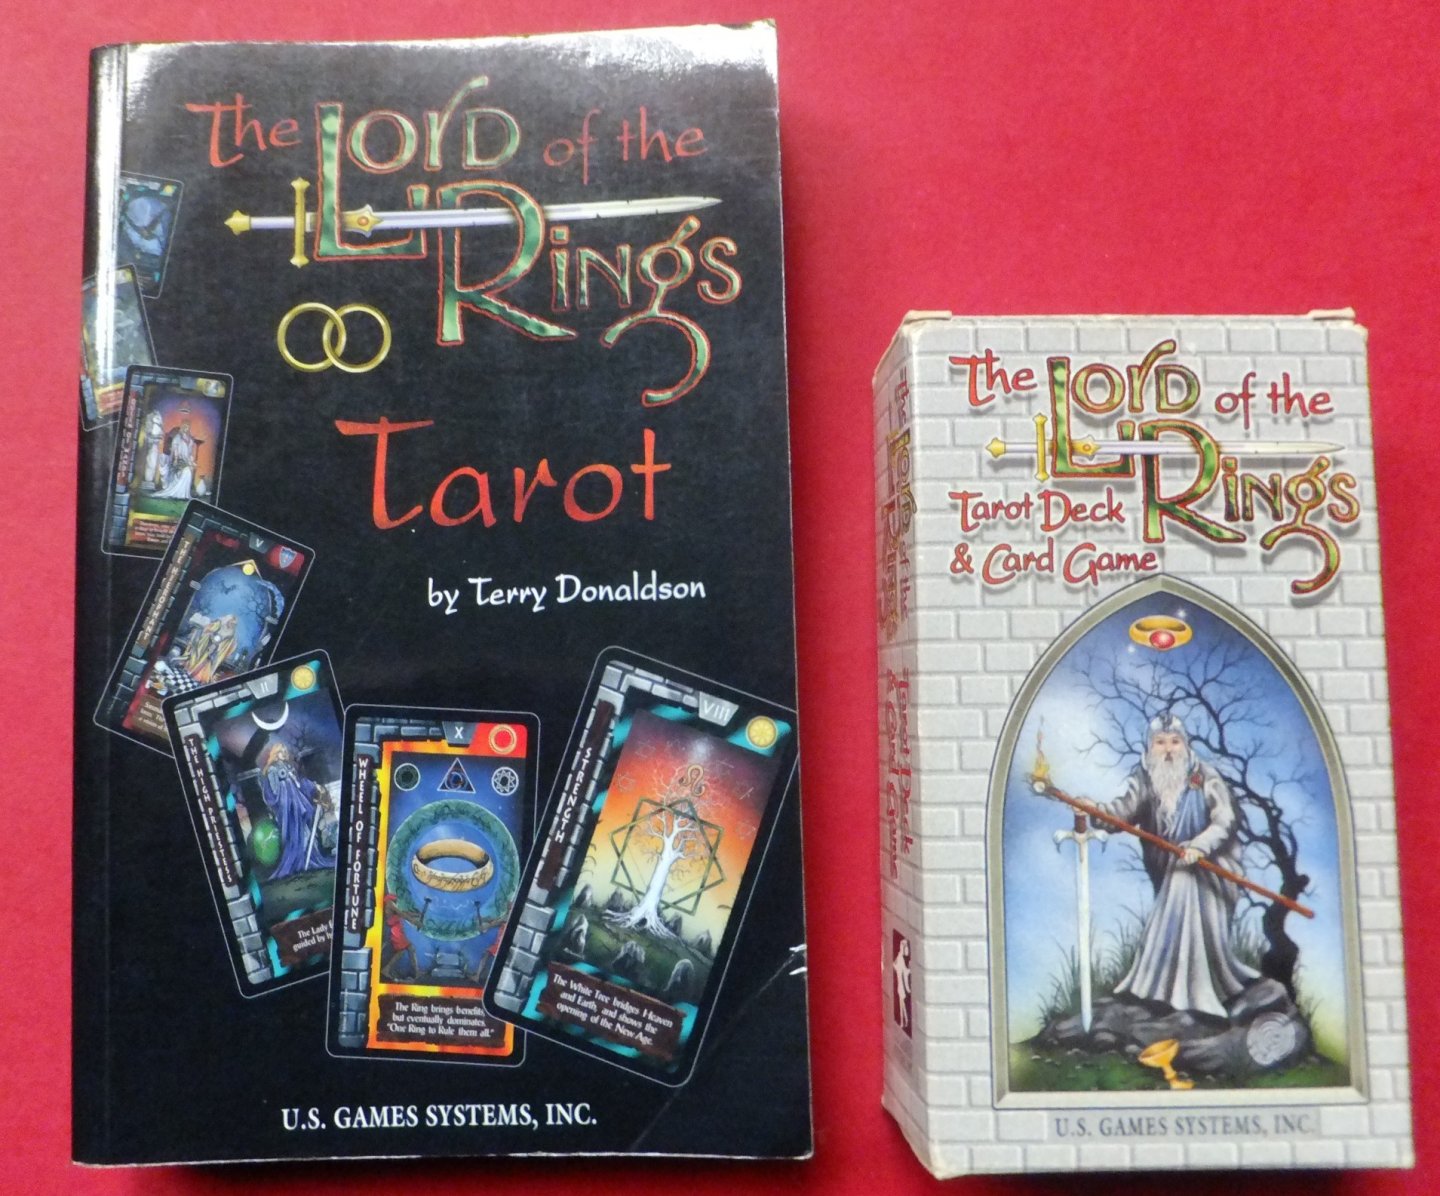 Donaldson, Terry - The Lord of the Rings Tarot 1 57281 054 8